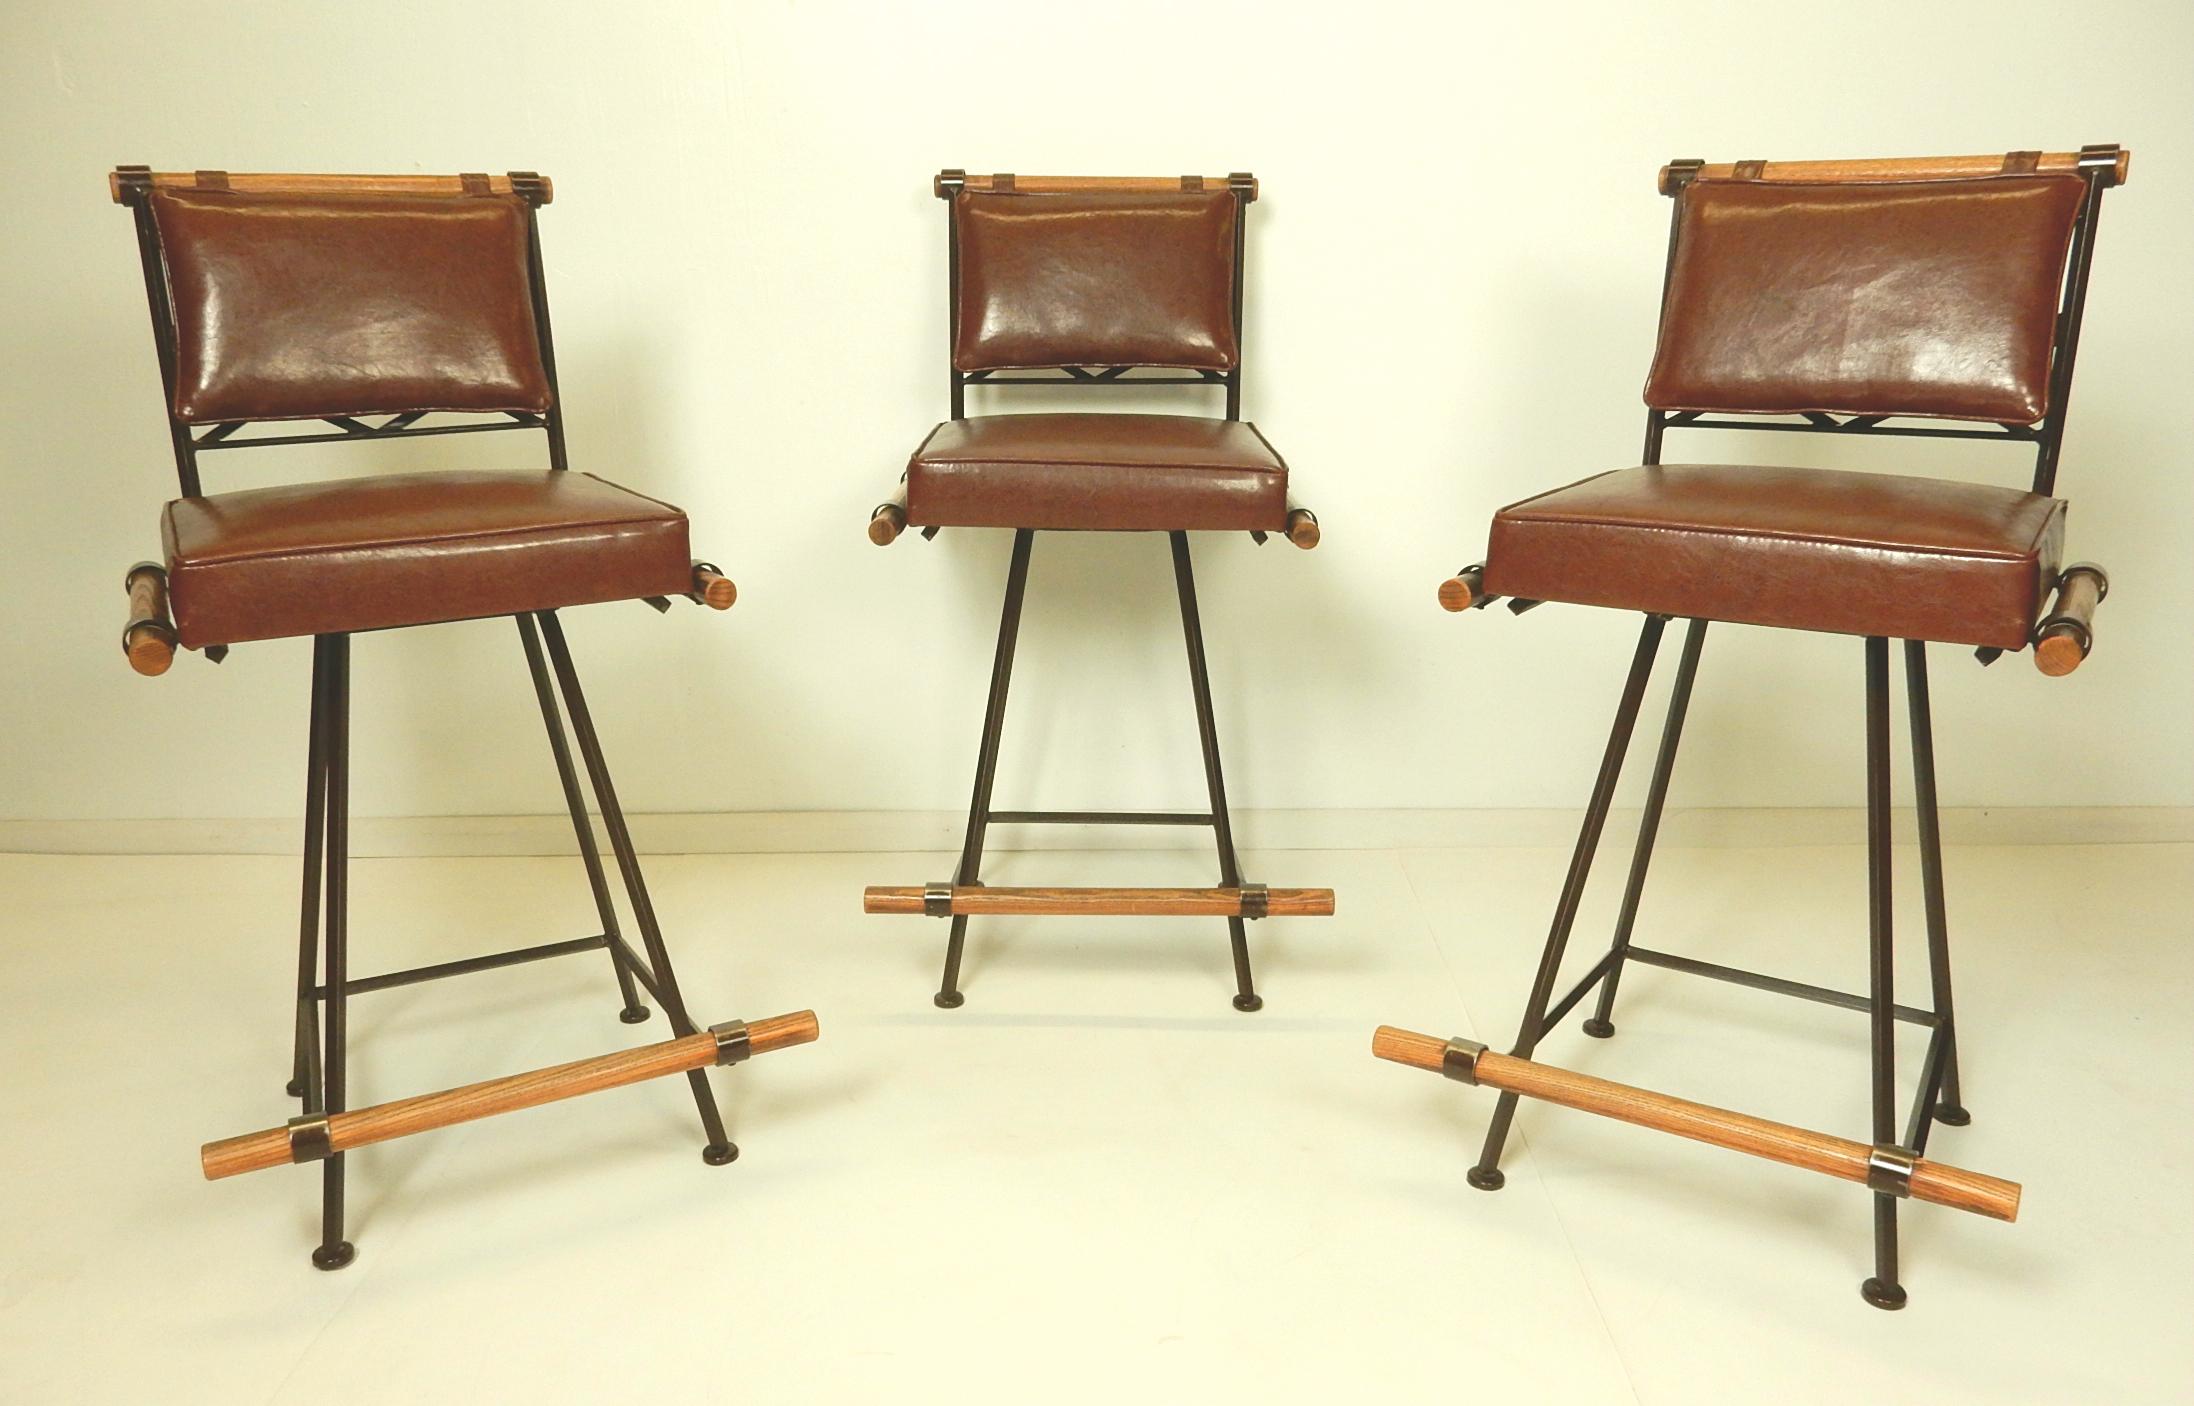 Fabulous set of 3 brown iron, wood and faux leather bar stools by Inca of California.
In the style of Cleo Baldon design, these are heavy overbuilt iron stools with oakwood rails and foot rests.
Newly upholstered in leather like brown vinyl.